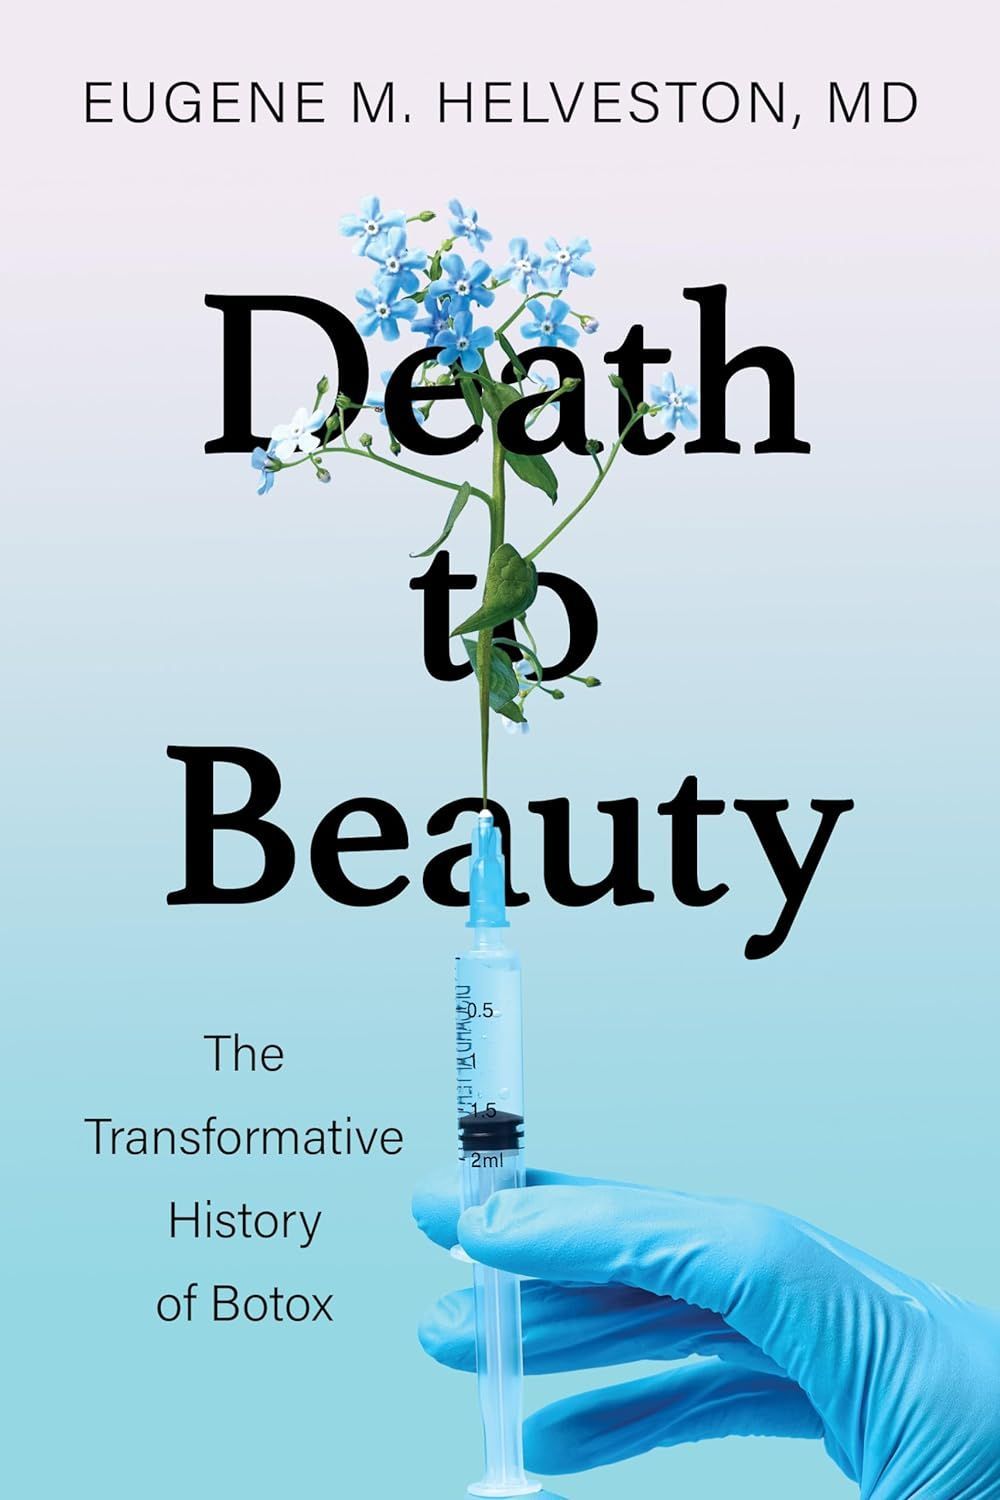 The Eyes Have It: On Eugene M. Helveston’s “Death to Beauty”